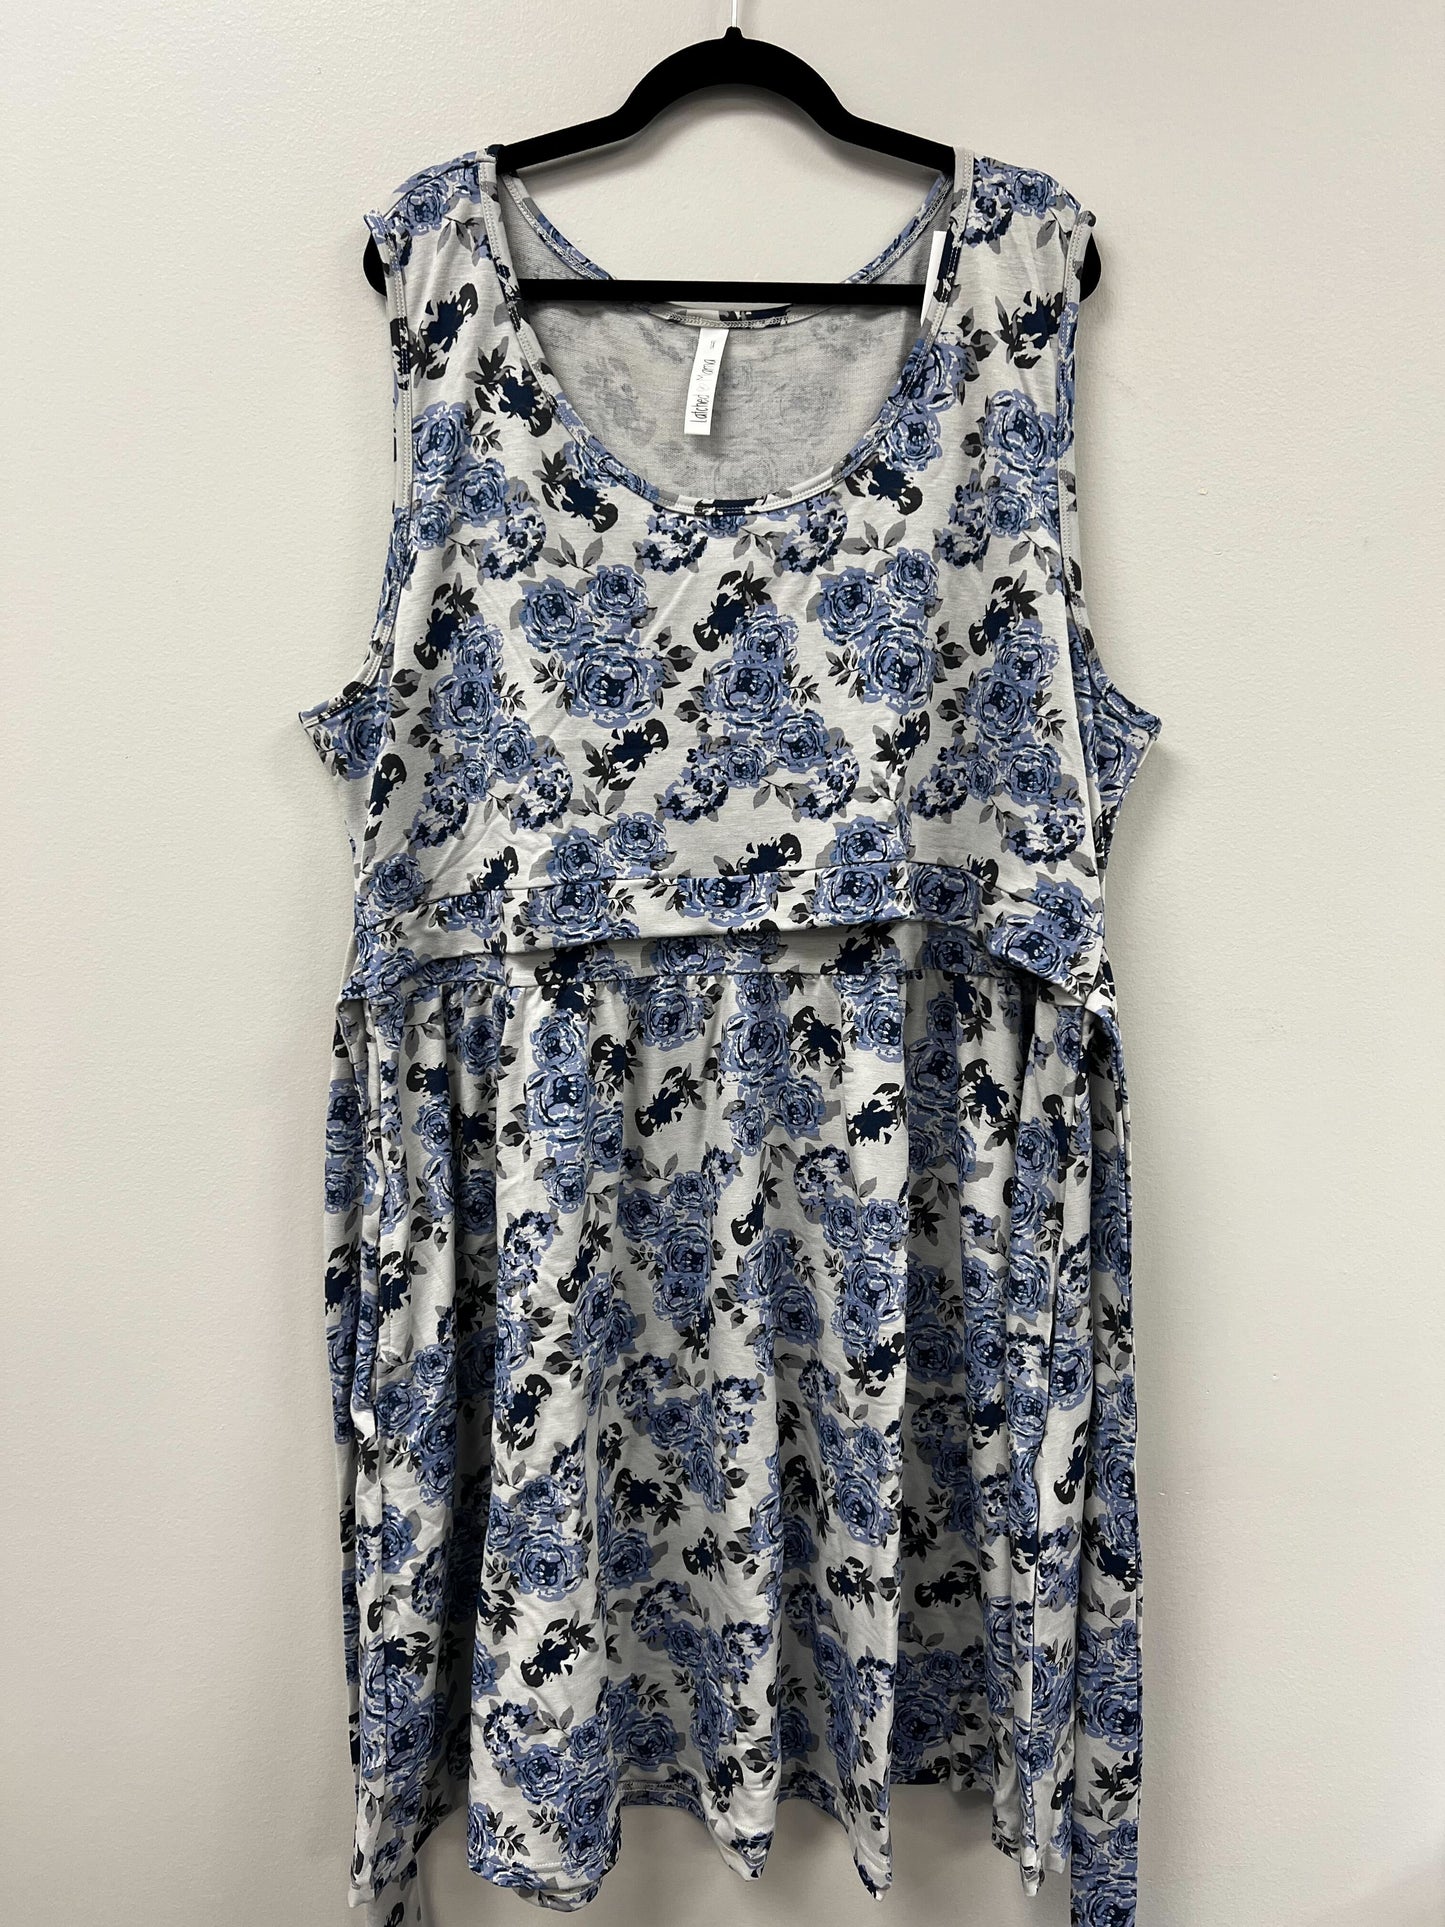 Outlet 5902 - Latched Mama Sunkissed Nursing Sundress - Periwinkle Bouquet - 4X